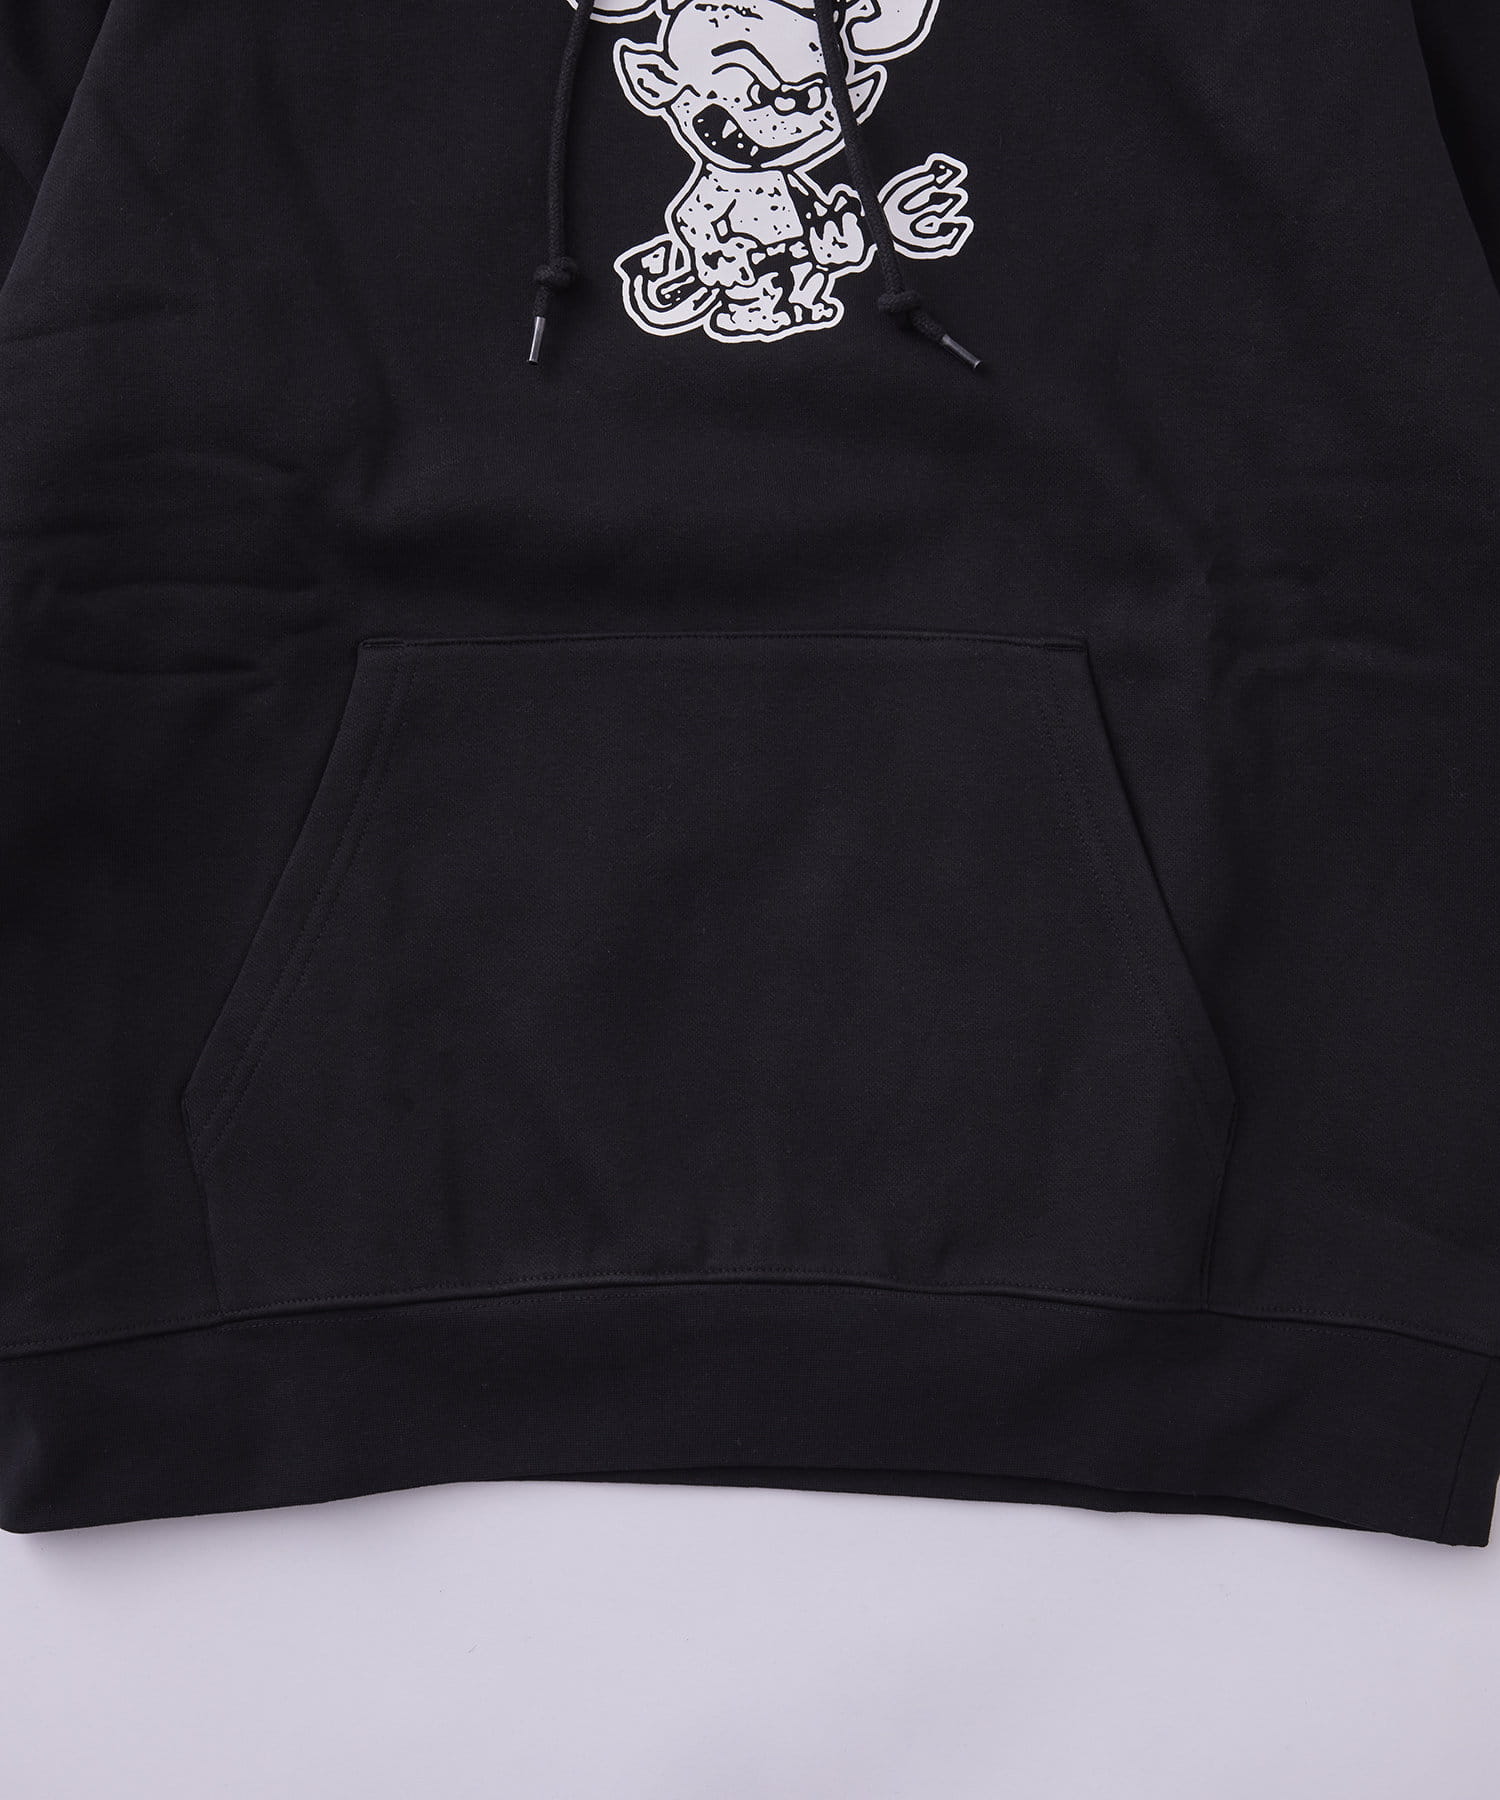 WHO’S WHO gallery(フーズフーギャラリー) OBEY DEMON HOODIE